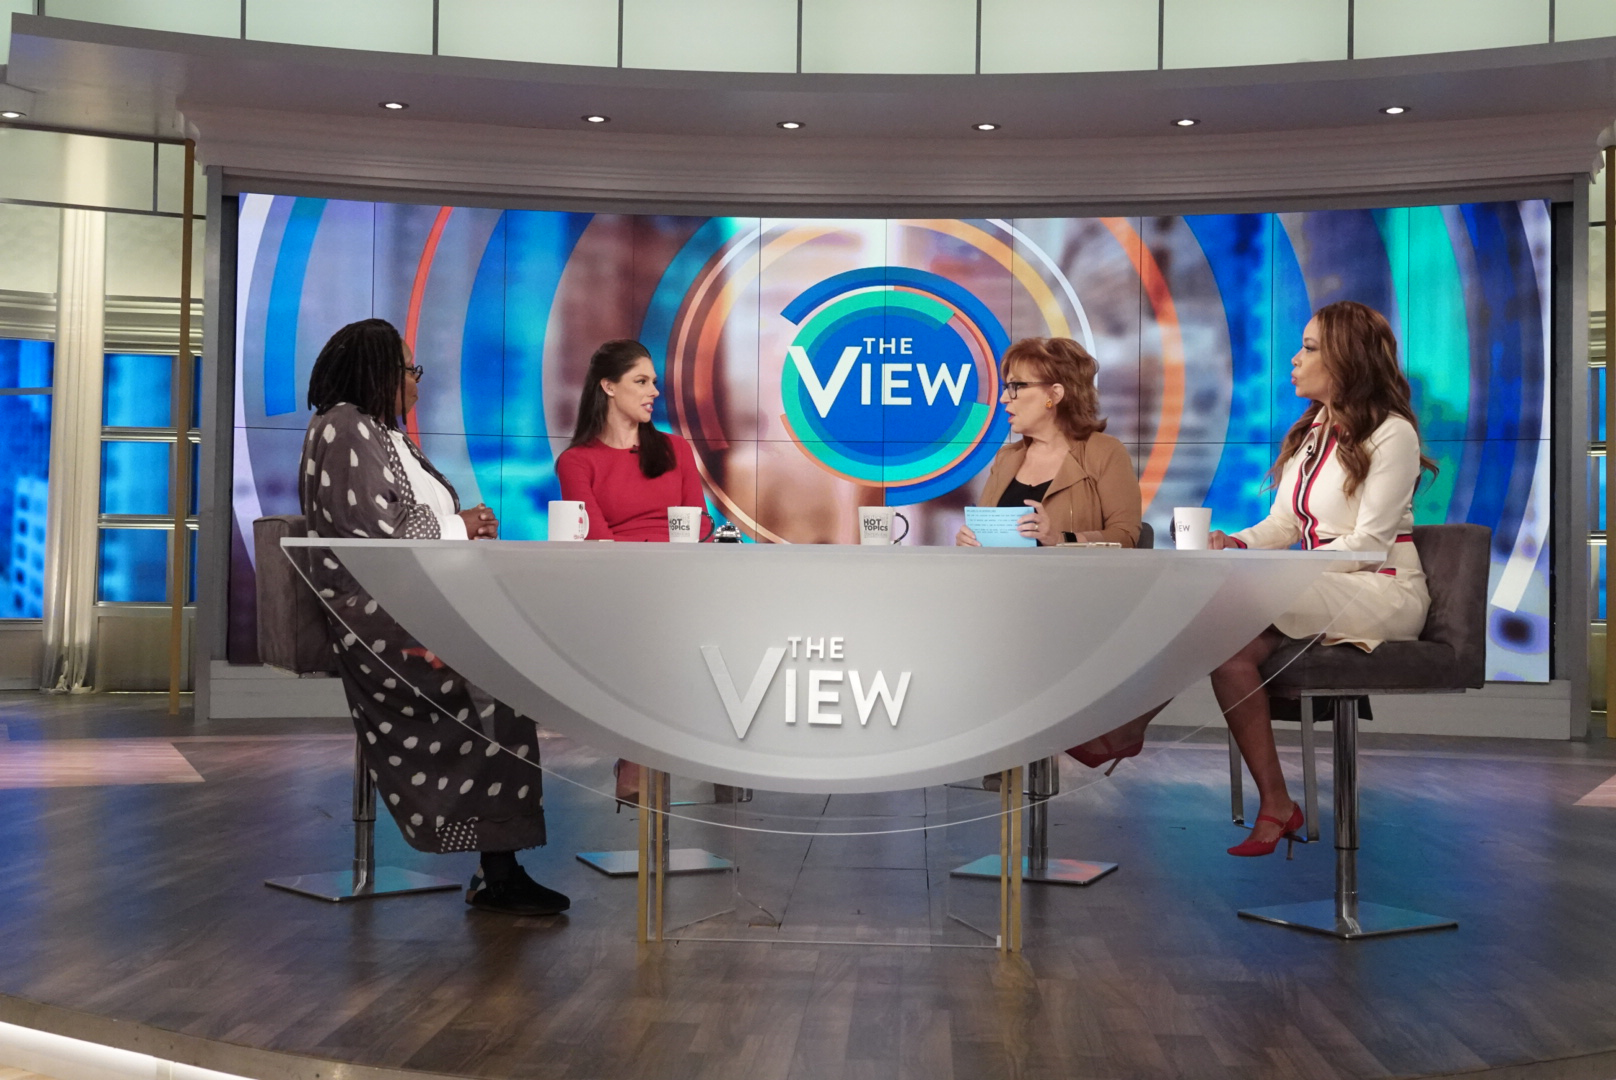 PHOTO: "The View" co-hosts discuss Senator Jeff Flake's dramatic decision to advocate for an FBI investigation into claims against Supreme Court nominee Brett Kavanaugh.